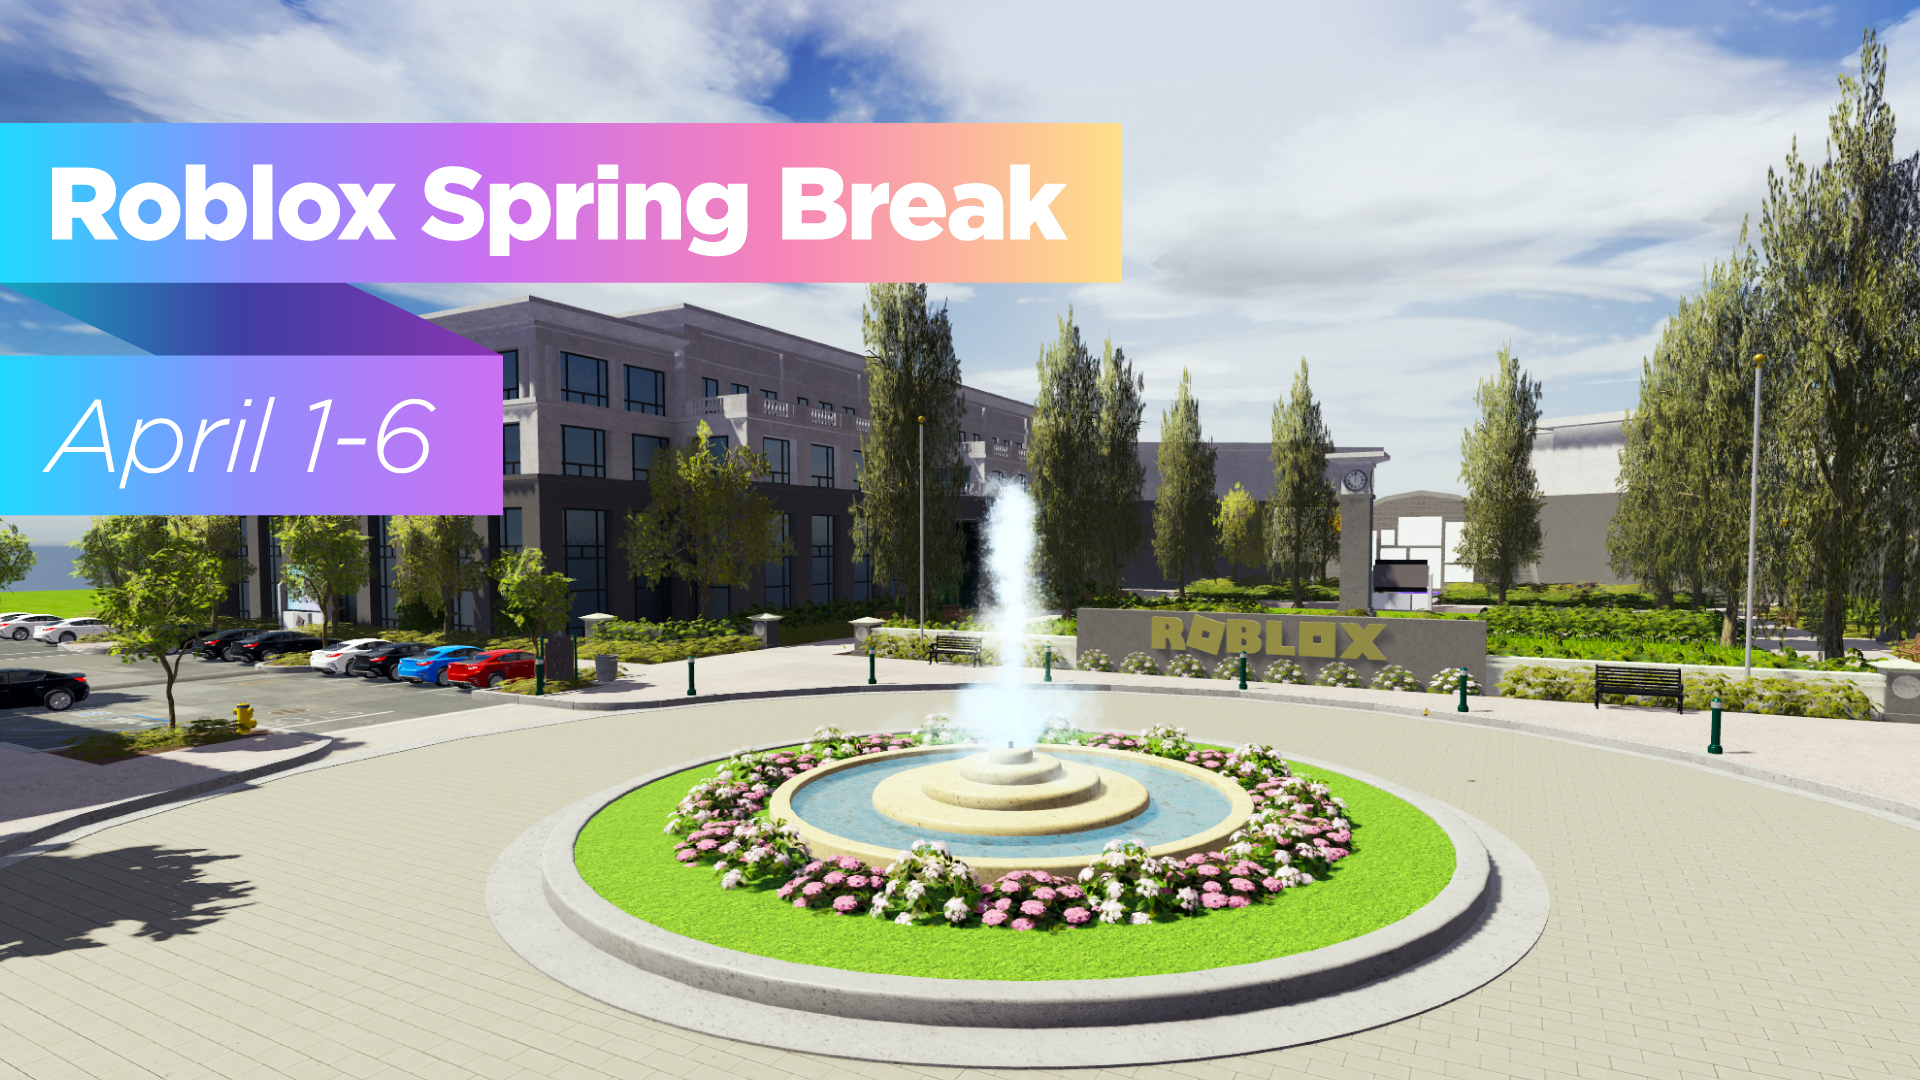 Why We Re Bringing Spring Break To Roblox Employees Roblox Blog - when do roblox moderators take a break